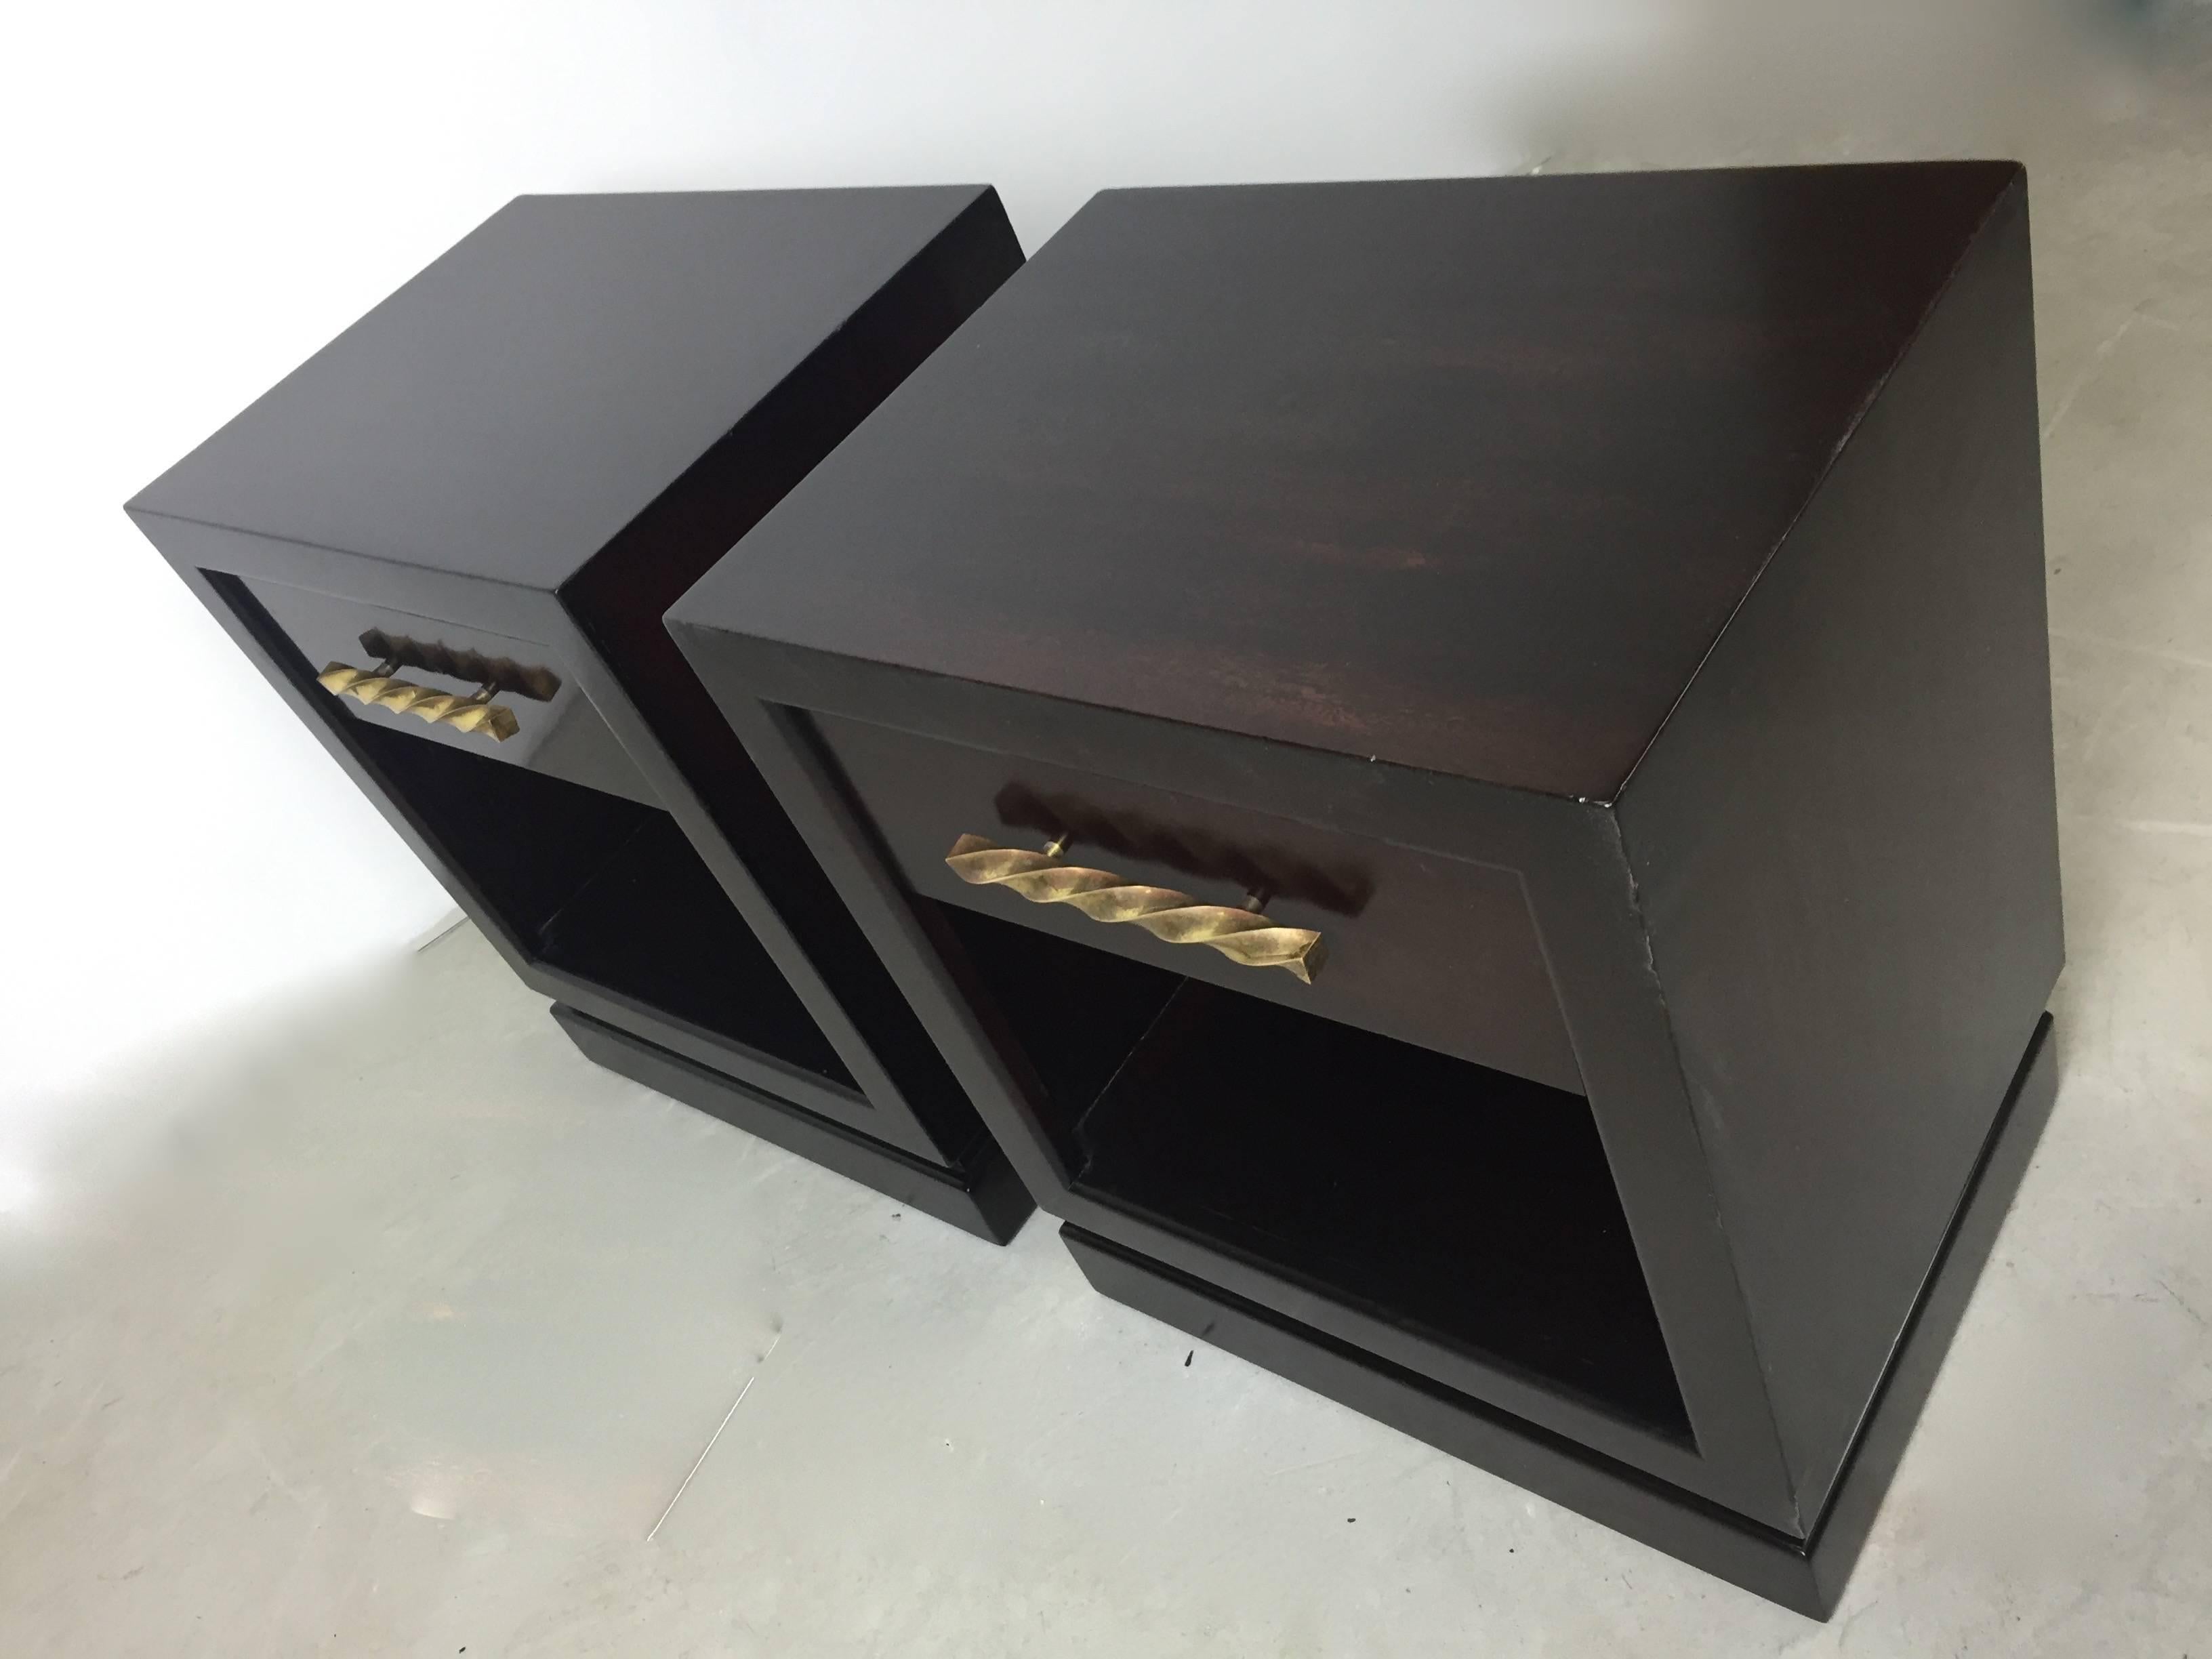 Pair of custom-made 1950s lamp tables in Mahogany with handmade brass hardware. Matching chests are available as well. A great American modern design.